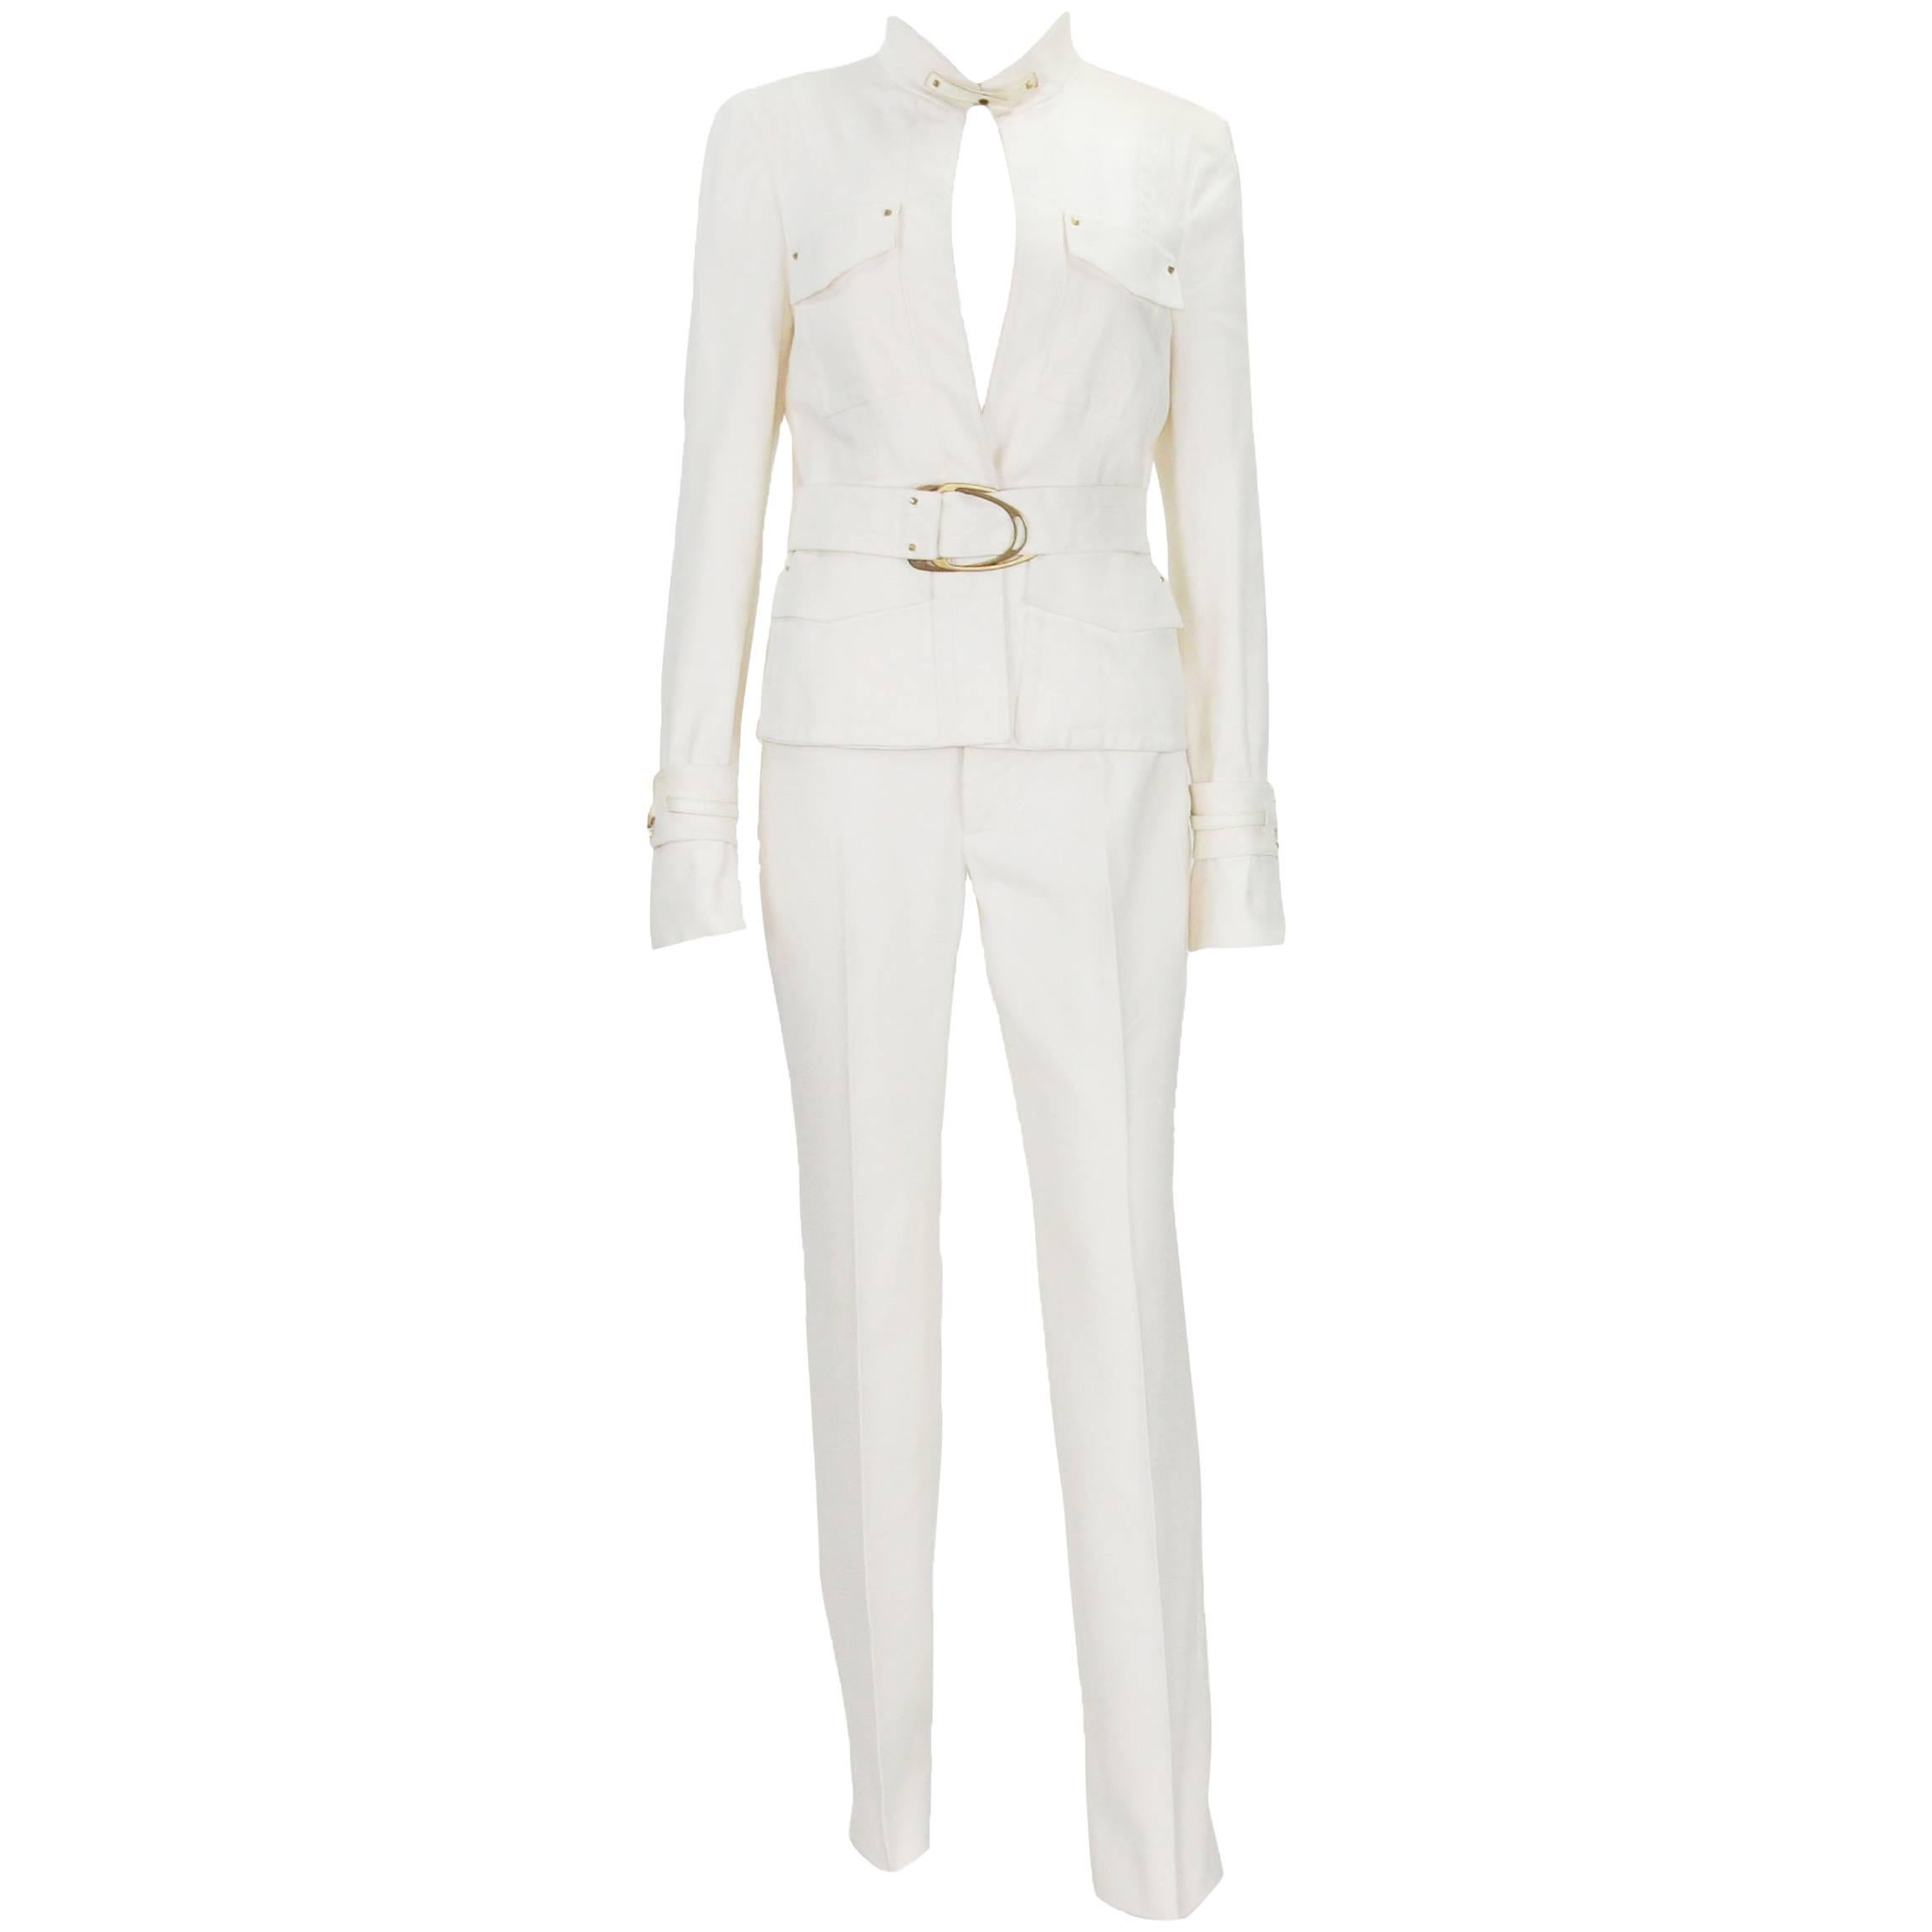 Tom Ford for Gucci 2003 Collection Safari White Cotton Belted Pant Suit 44